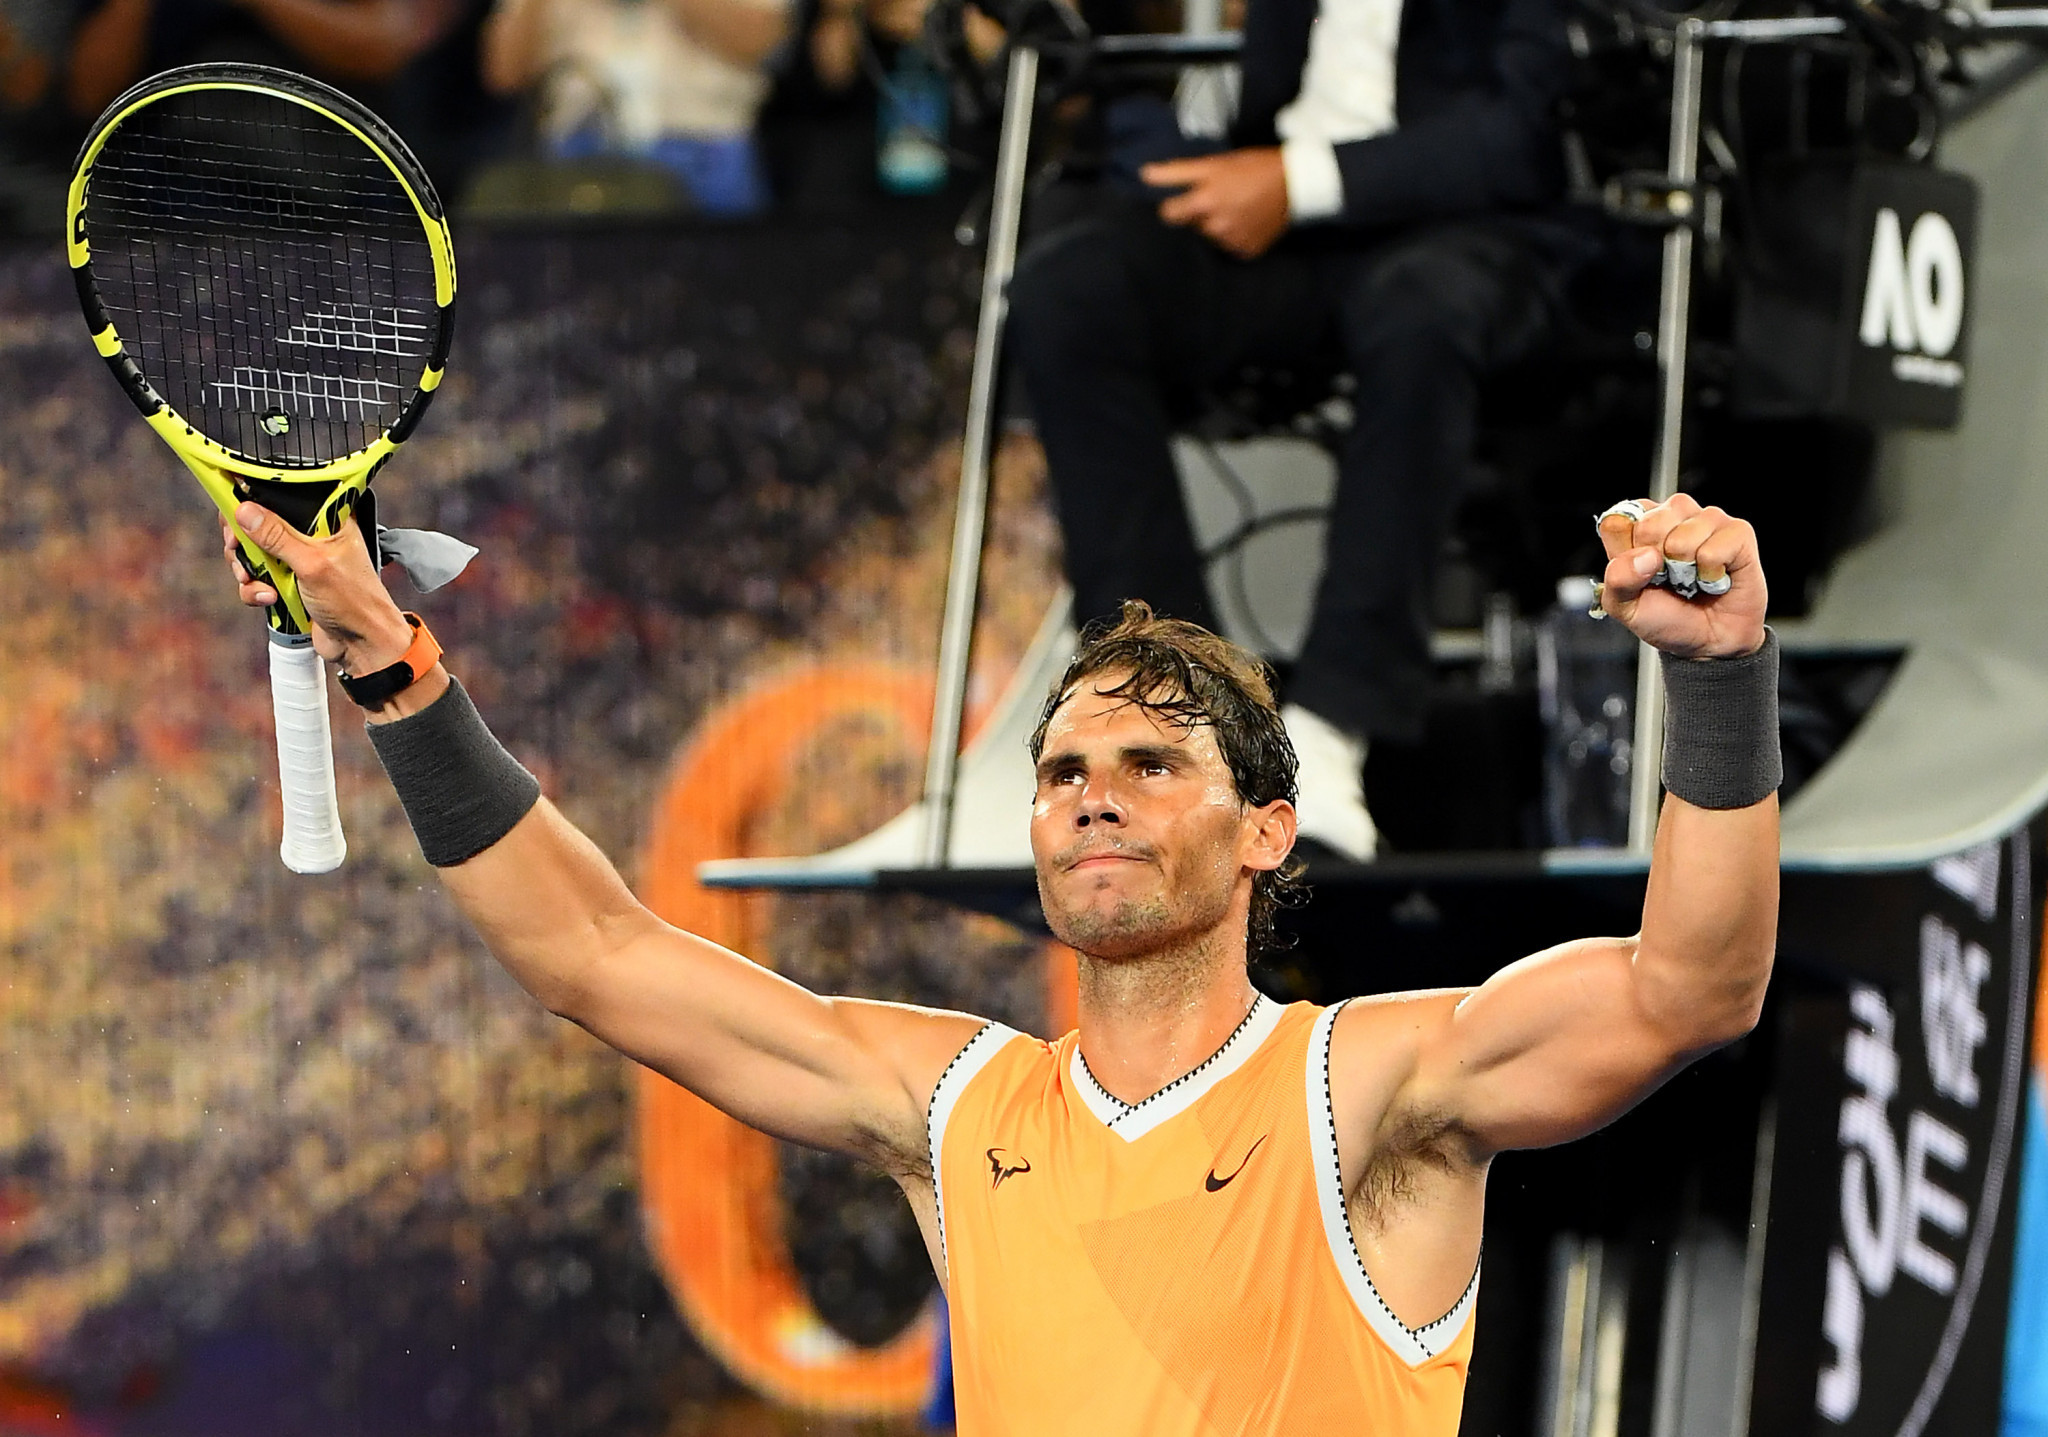 Rafael Nadal proved too strong as the second seed earned a straight sets win ©Getty Images